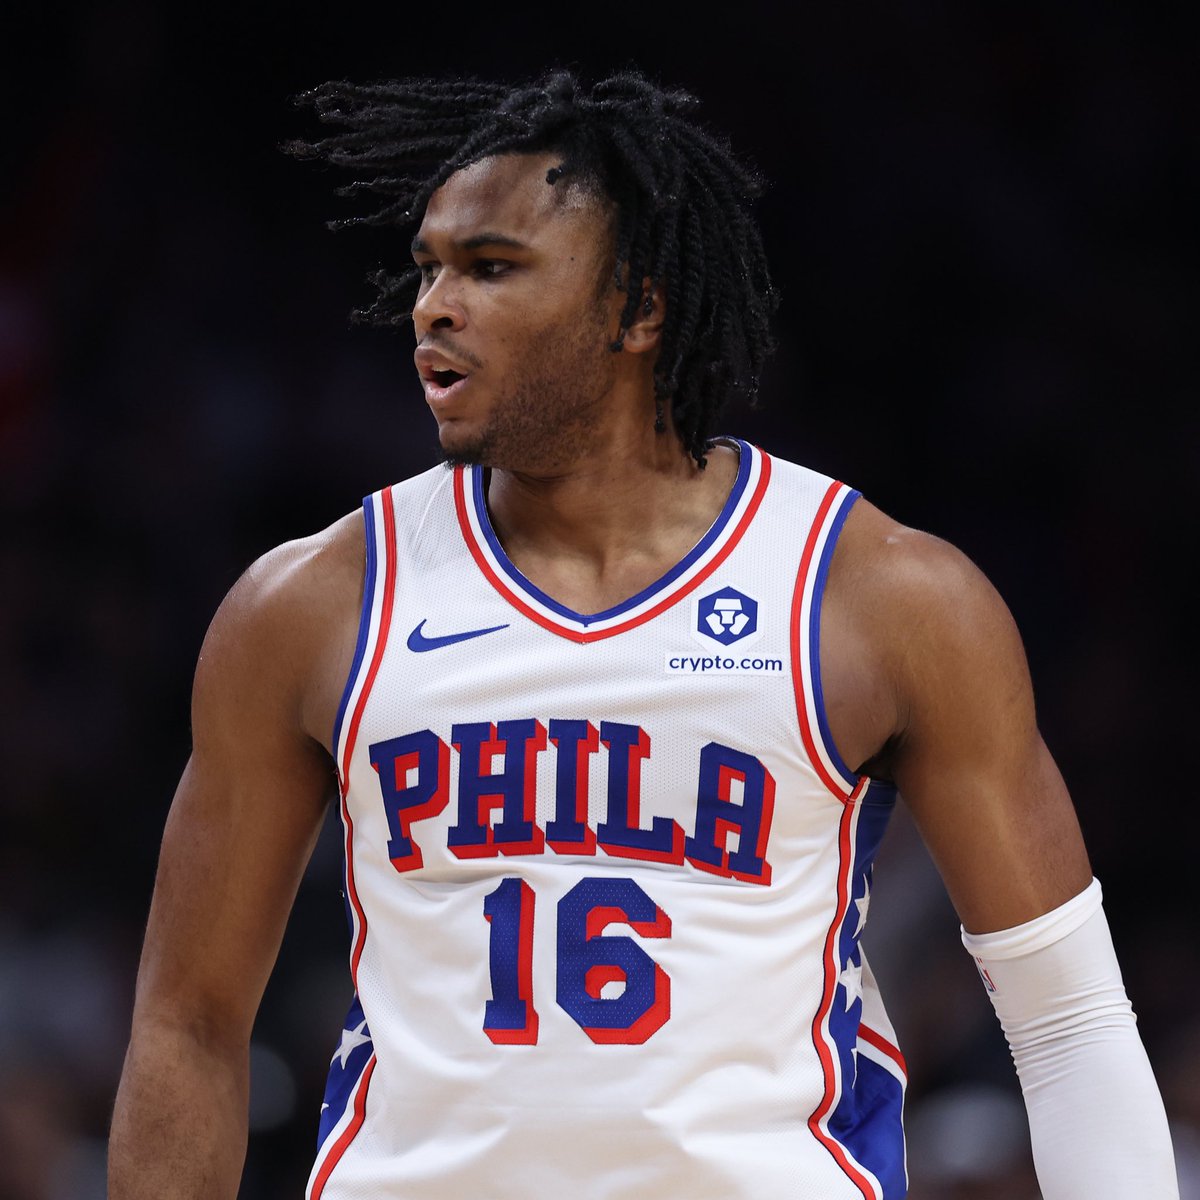 Philadelphia 76ers undrafted rookie Ricky Council IV has brought impressive physicality, athleticism, and aggression off the bench for a depleted Sixers squad… He’s also the younger brother of Ricky Council III, Ricky Council II, & the son of Ricky Council